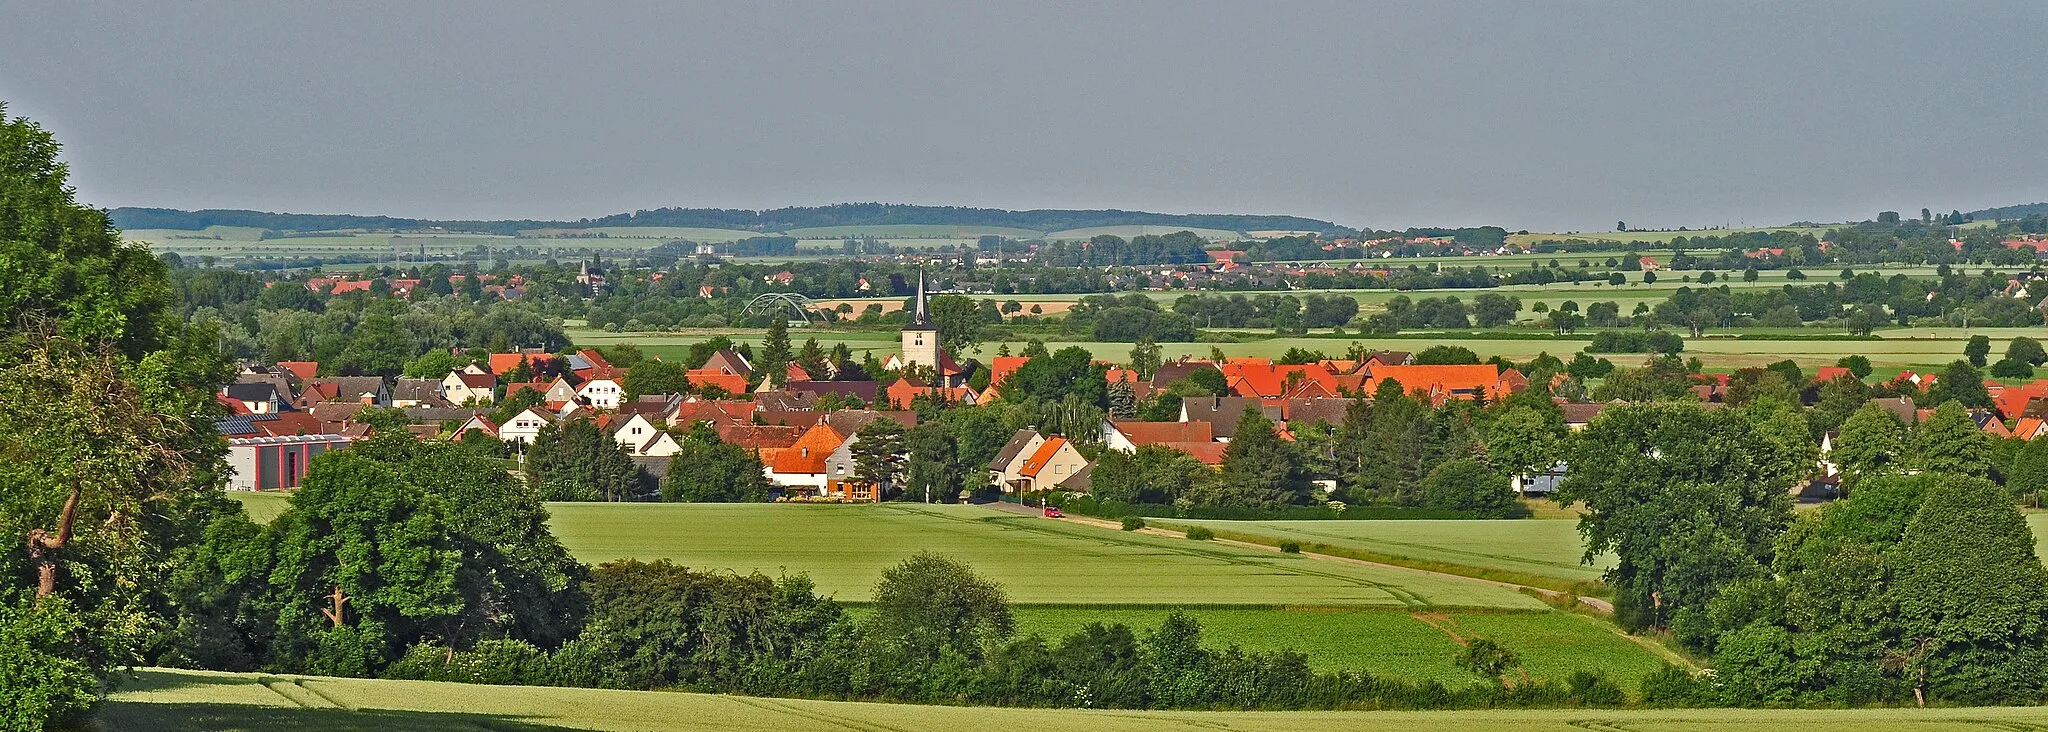 Photo showing: The valley of river Leine between Wülfingen and Heyersum in Lower Saxony, Germany.